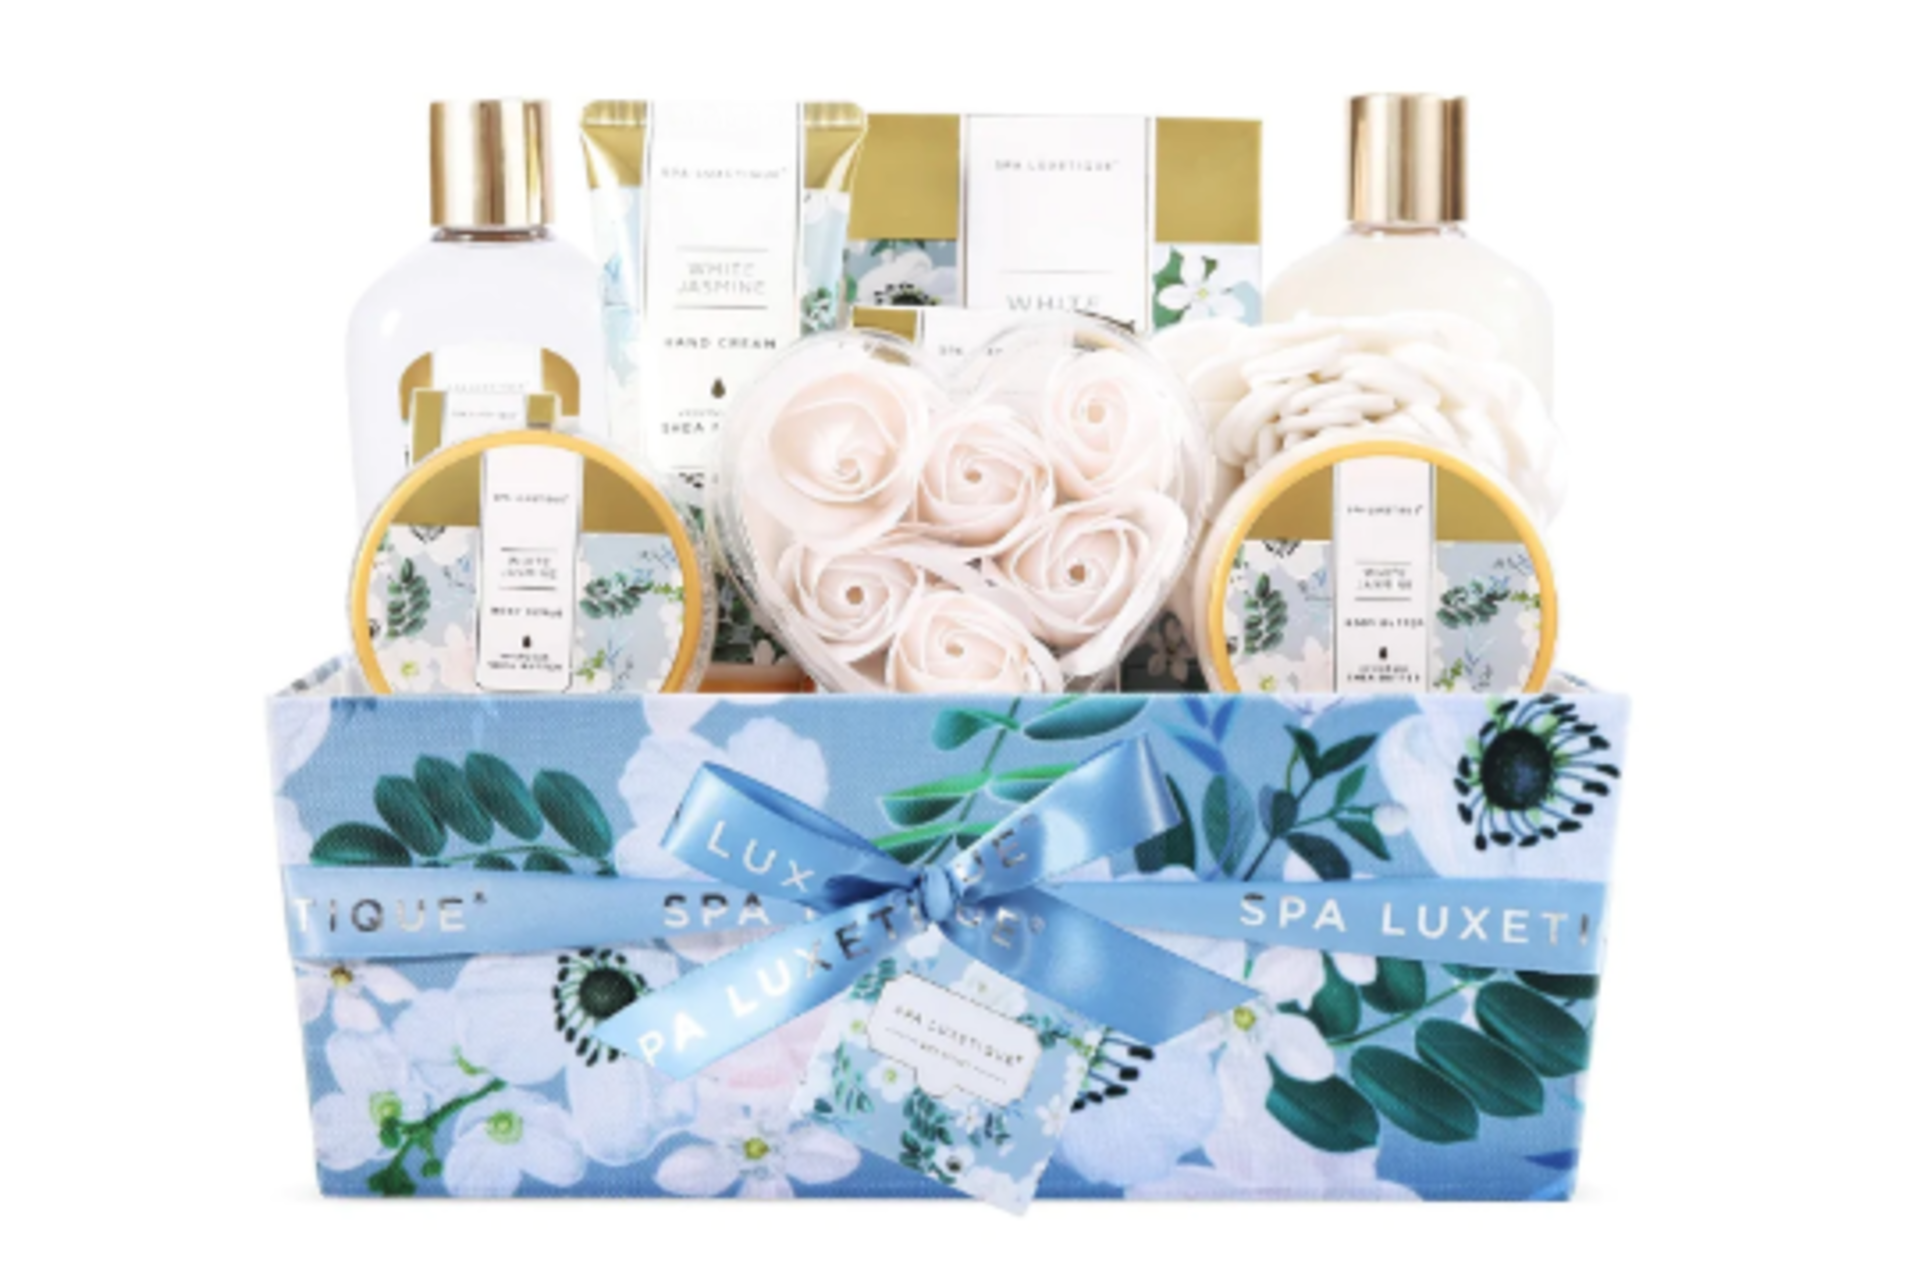 TRADE LOT 24 x New Packaged Spa Luxetique White Jasmine Home Spa Basket Set. (SKU: spa-bp-07-1) ??